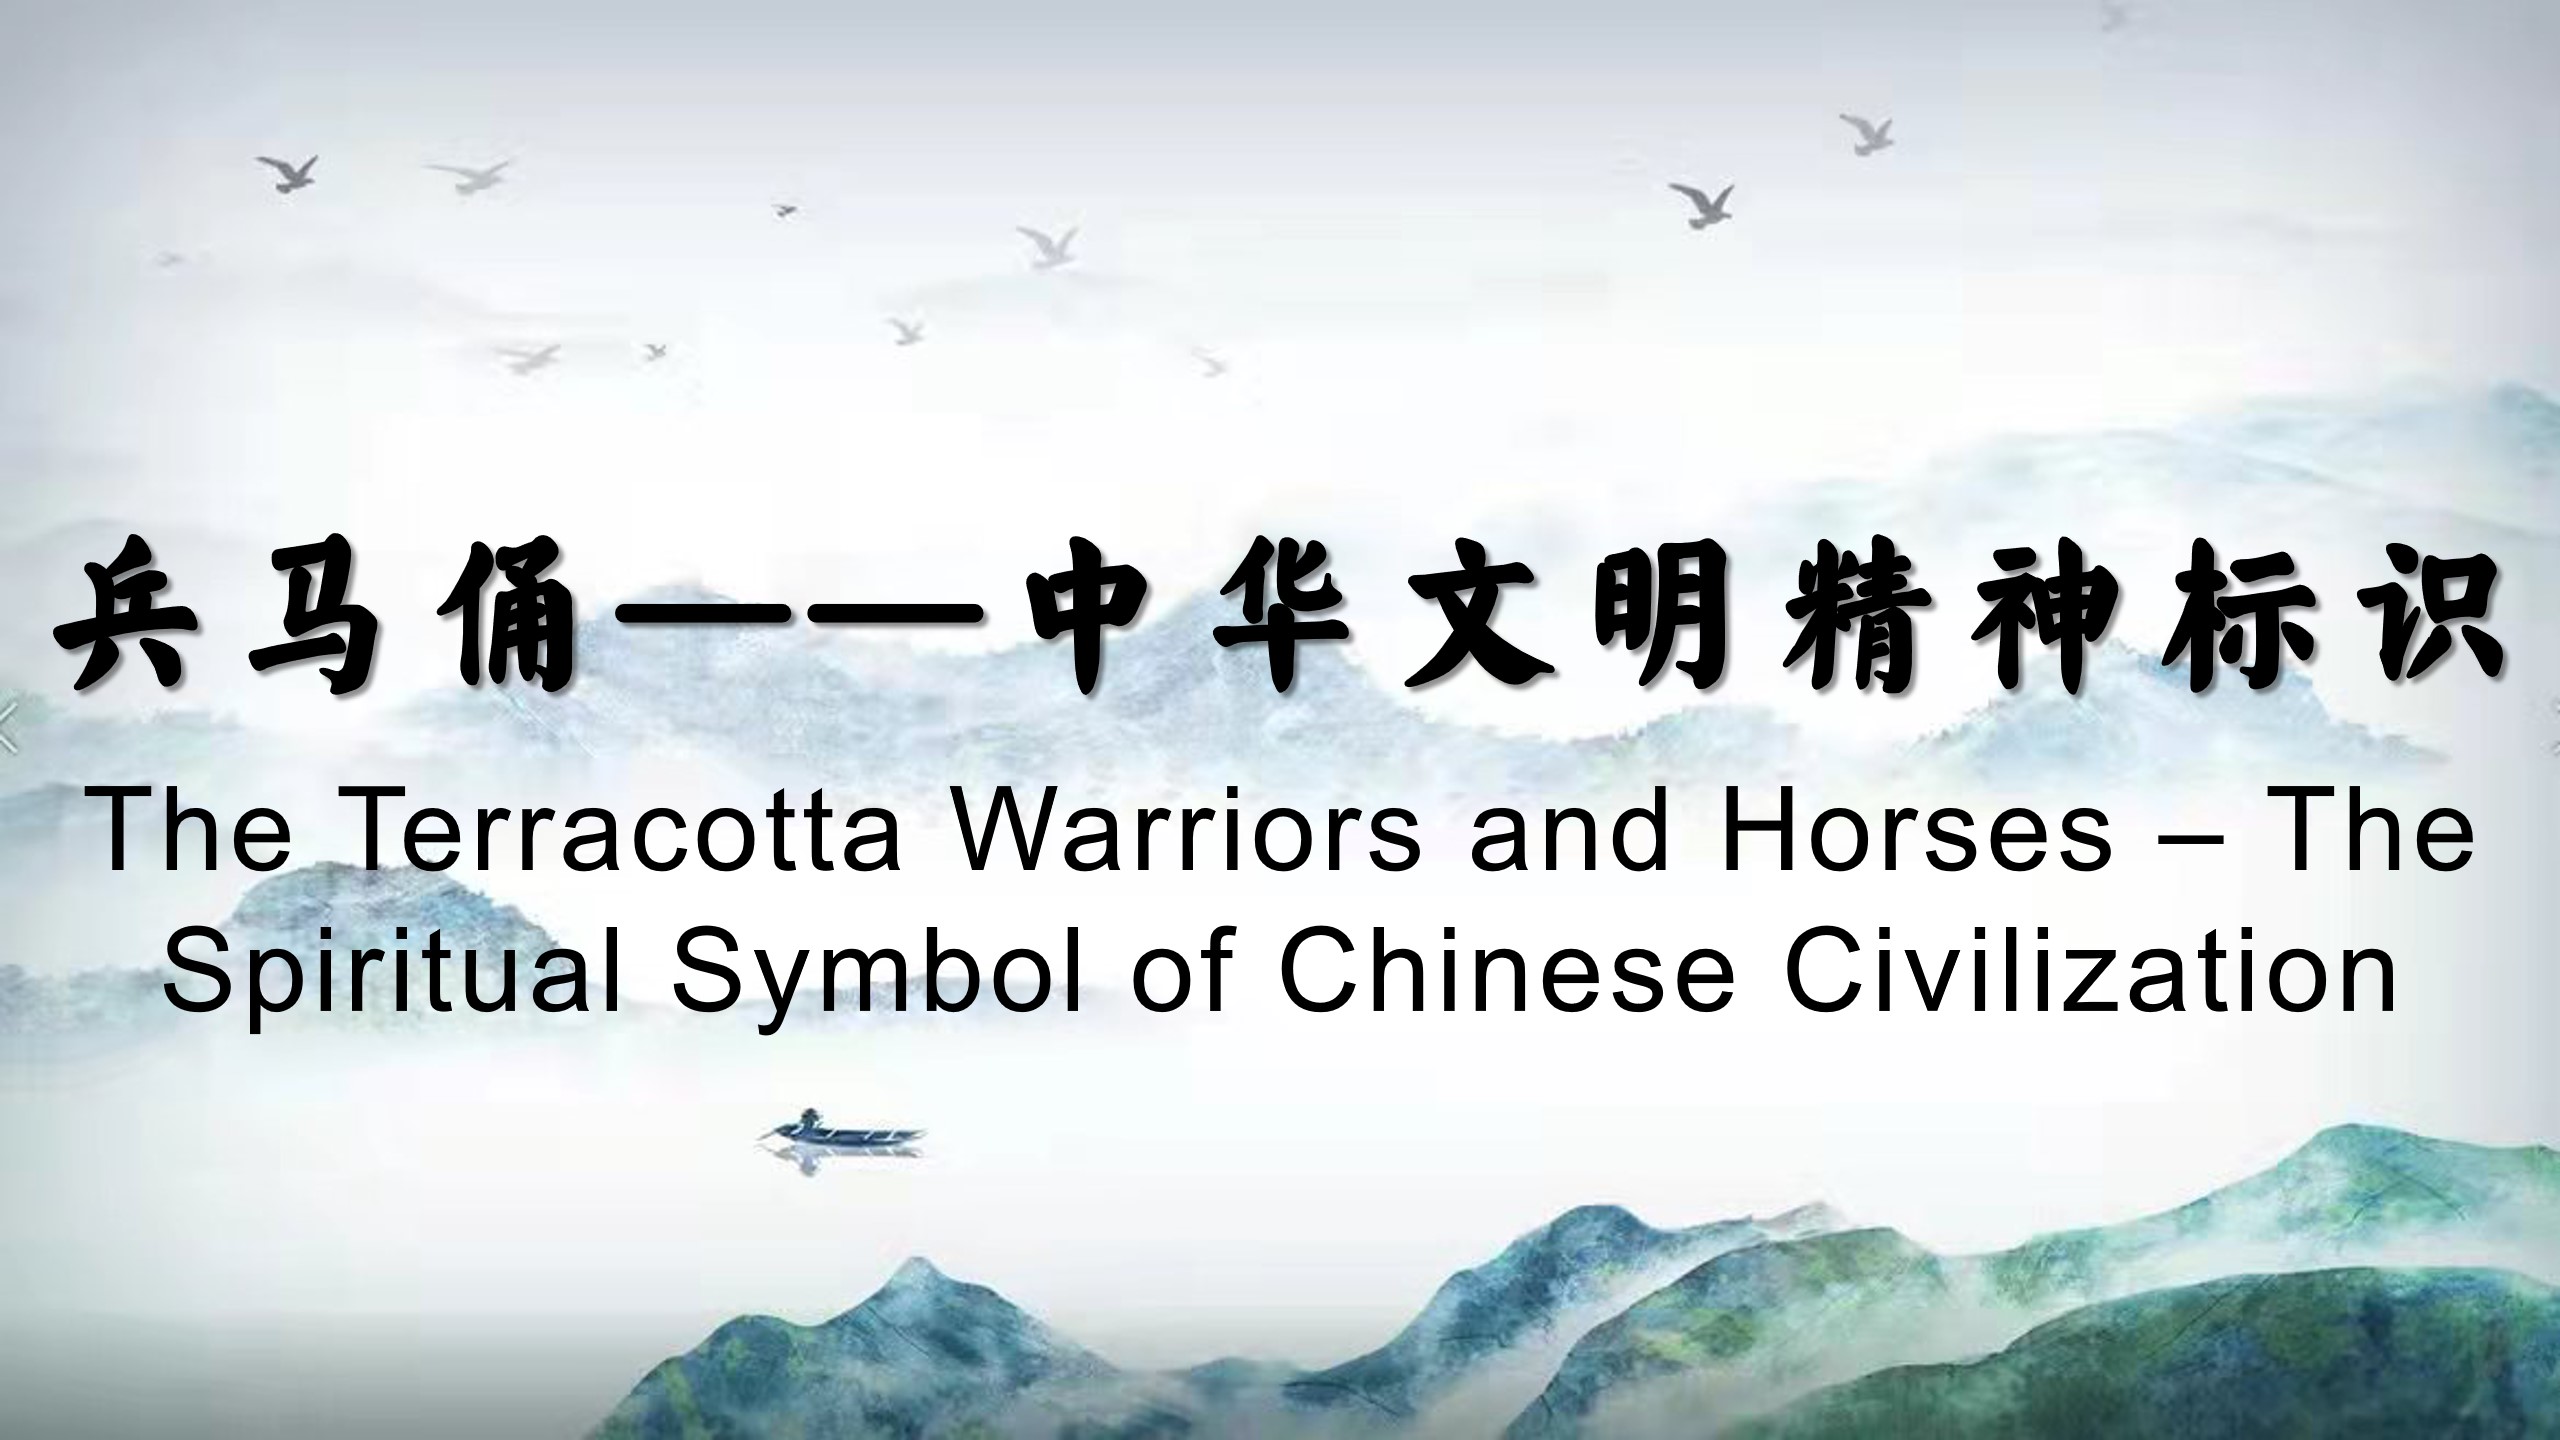 The Terracotta Warriors and Horses – The Spiritual Symbol of Chinese Civilization